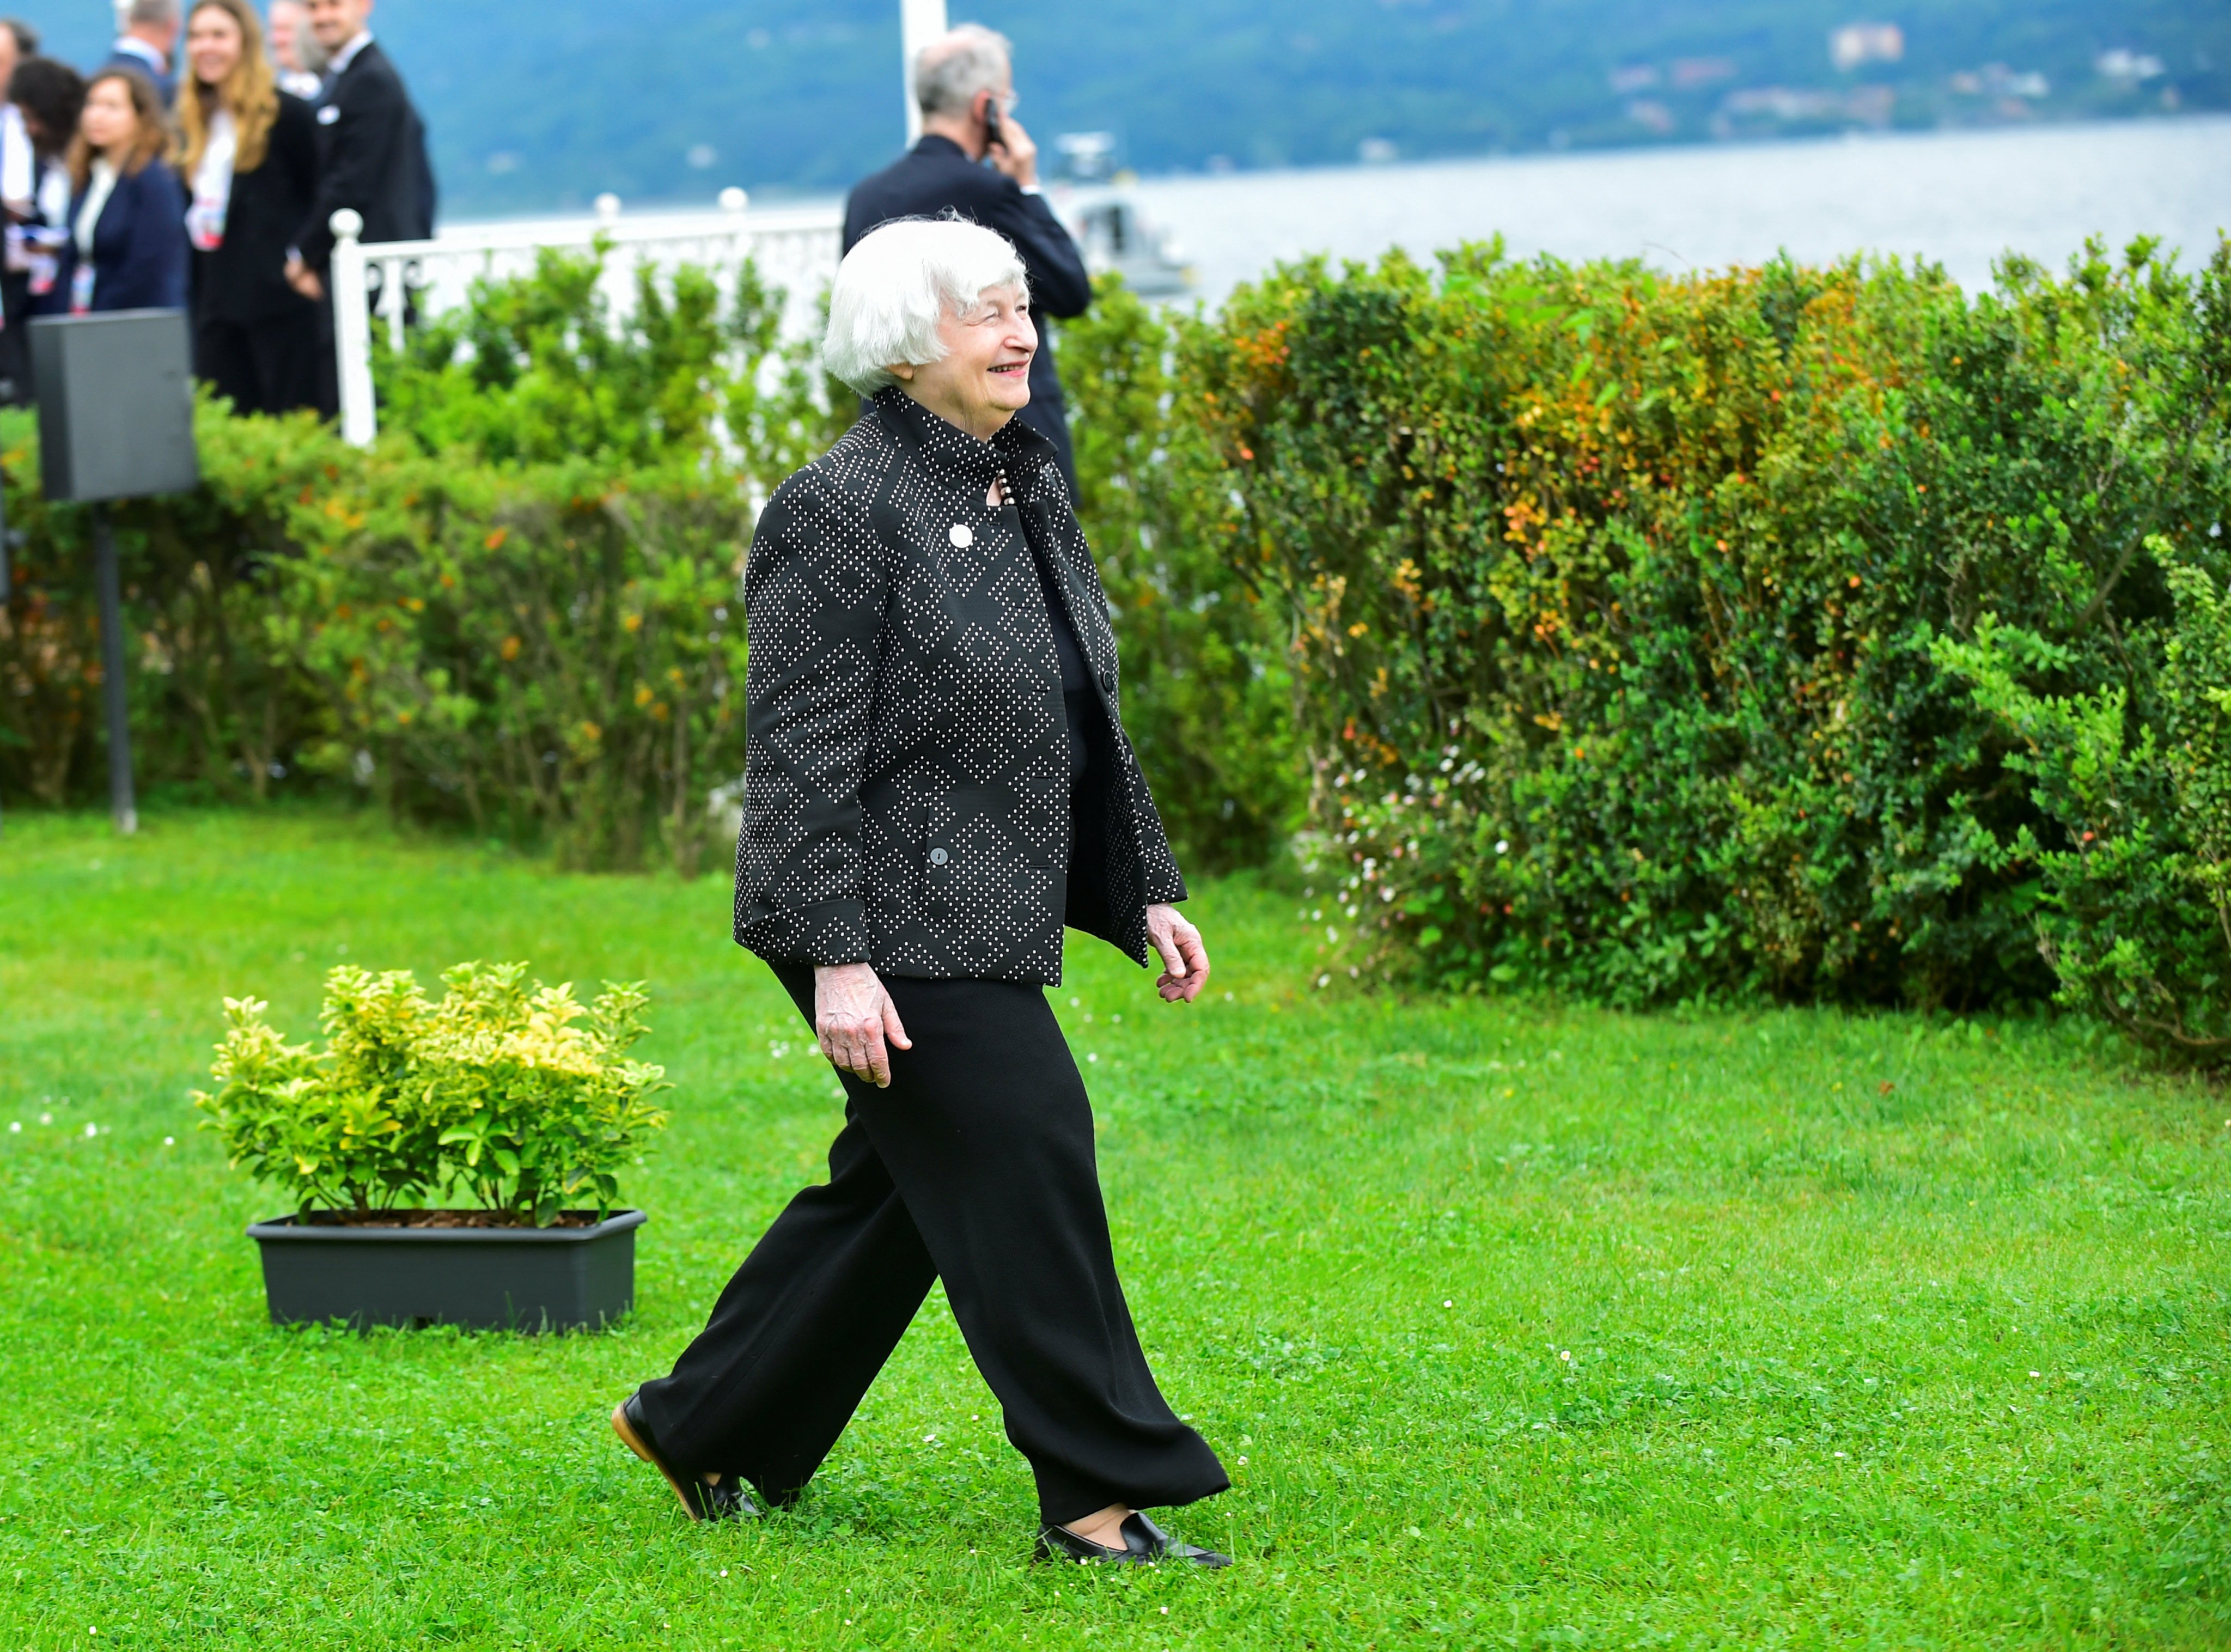 US Secretary of the Treasury Janet Yellen attends a G7 finance leaders meeting in Italy on May 24. Photo: Reuters